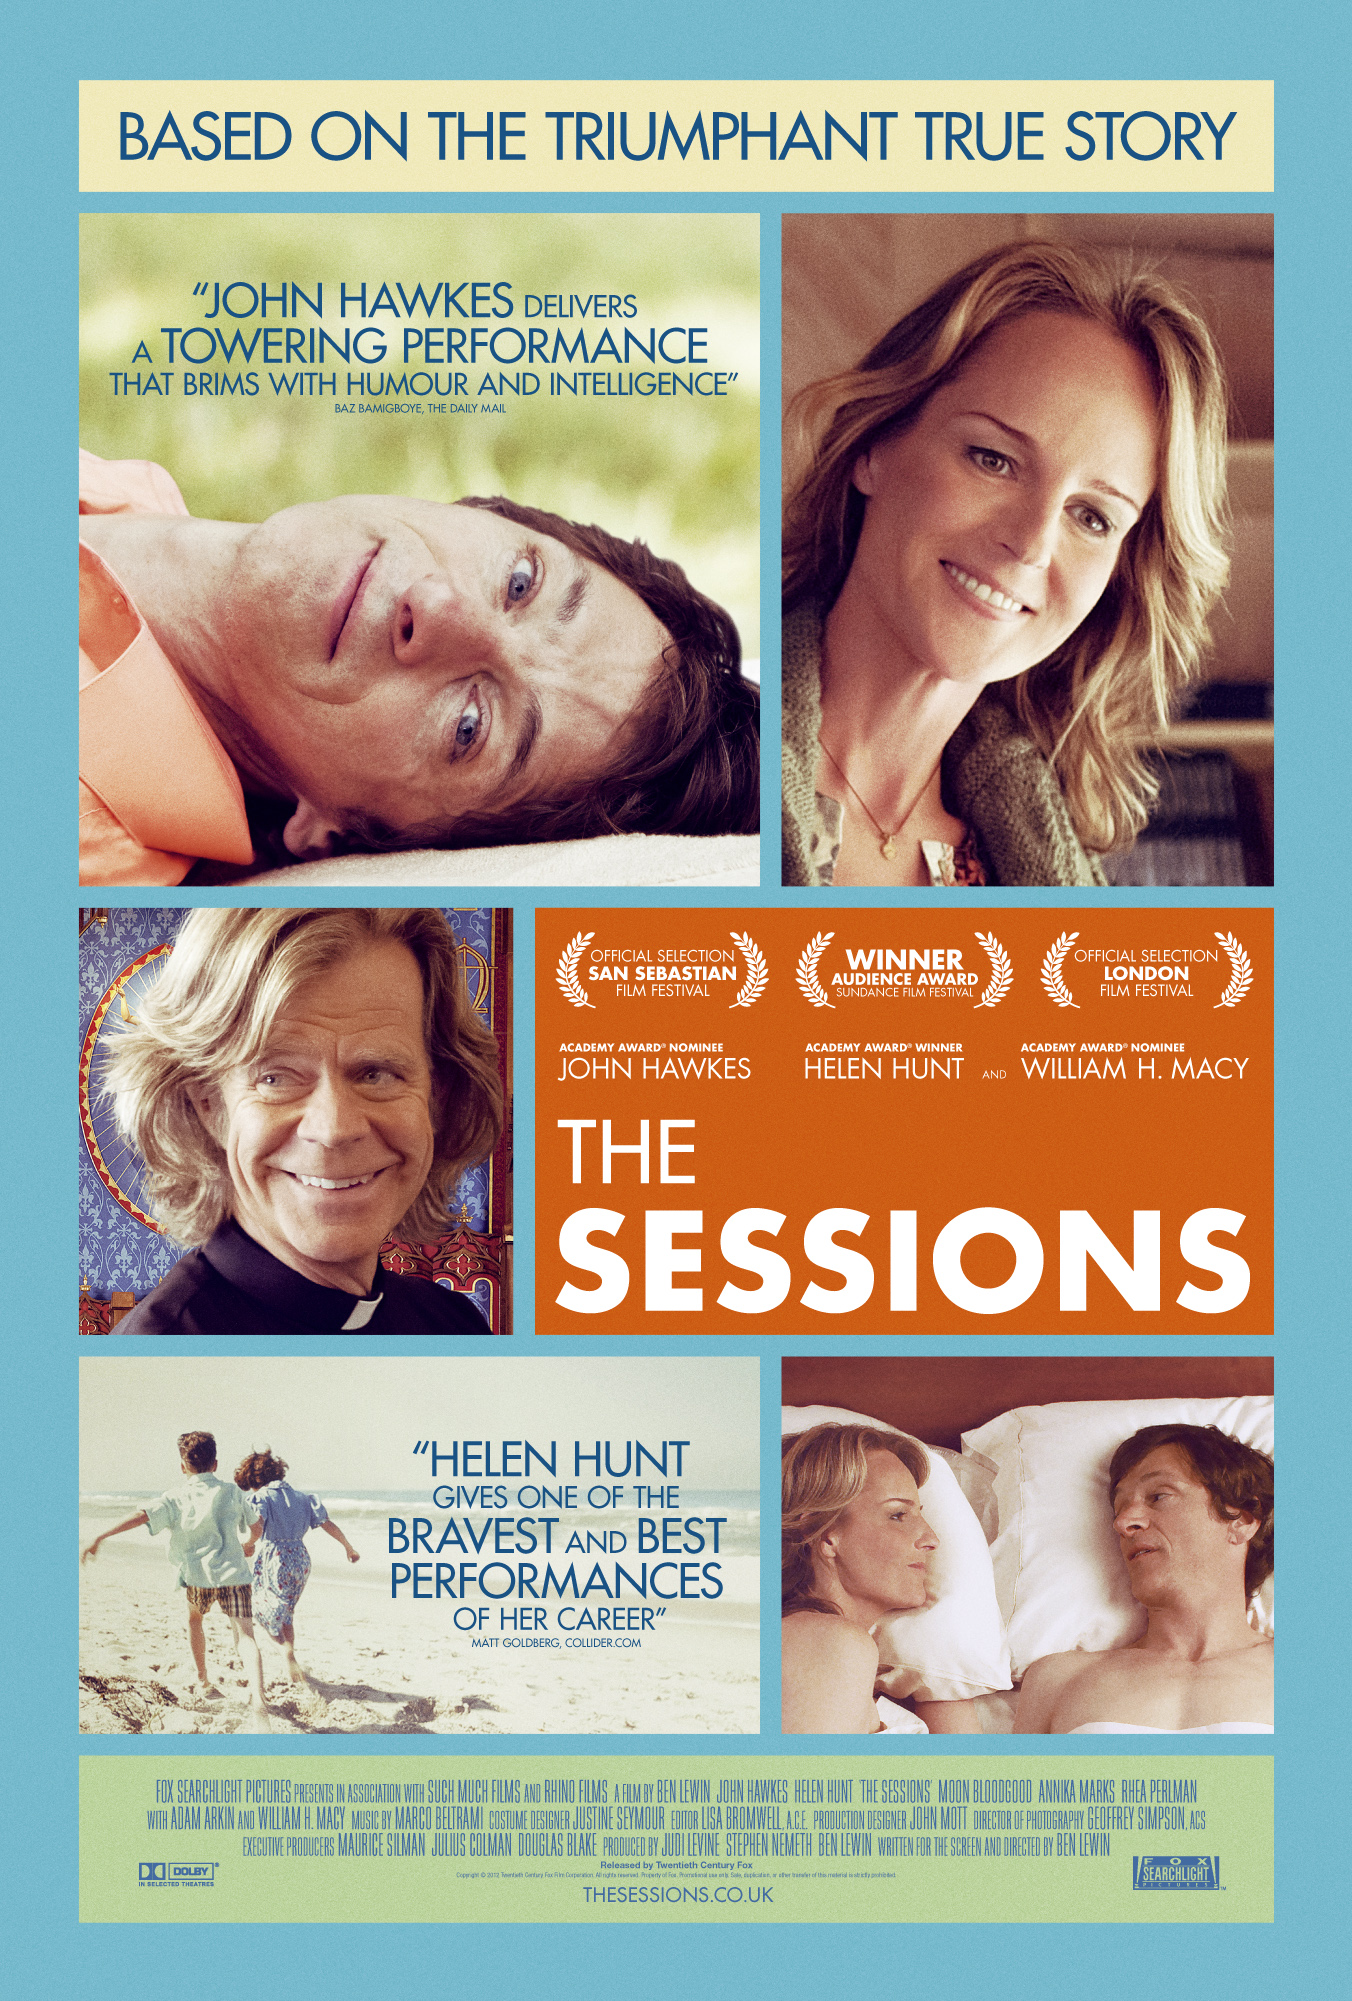 The Sessions Movie Poster with actors John Hawkes, Helen Hunt, and William H. Macy